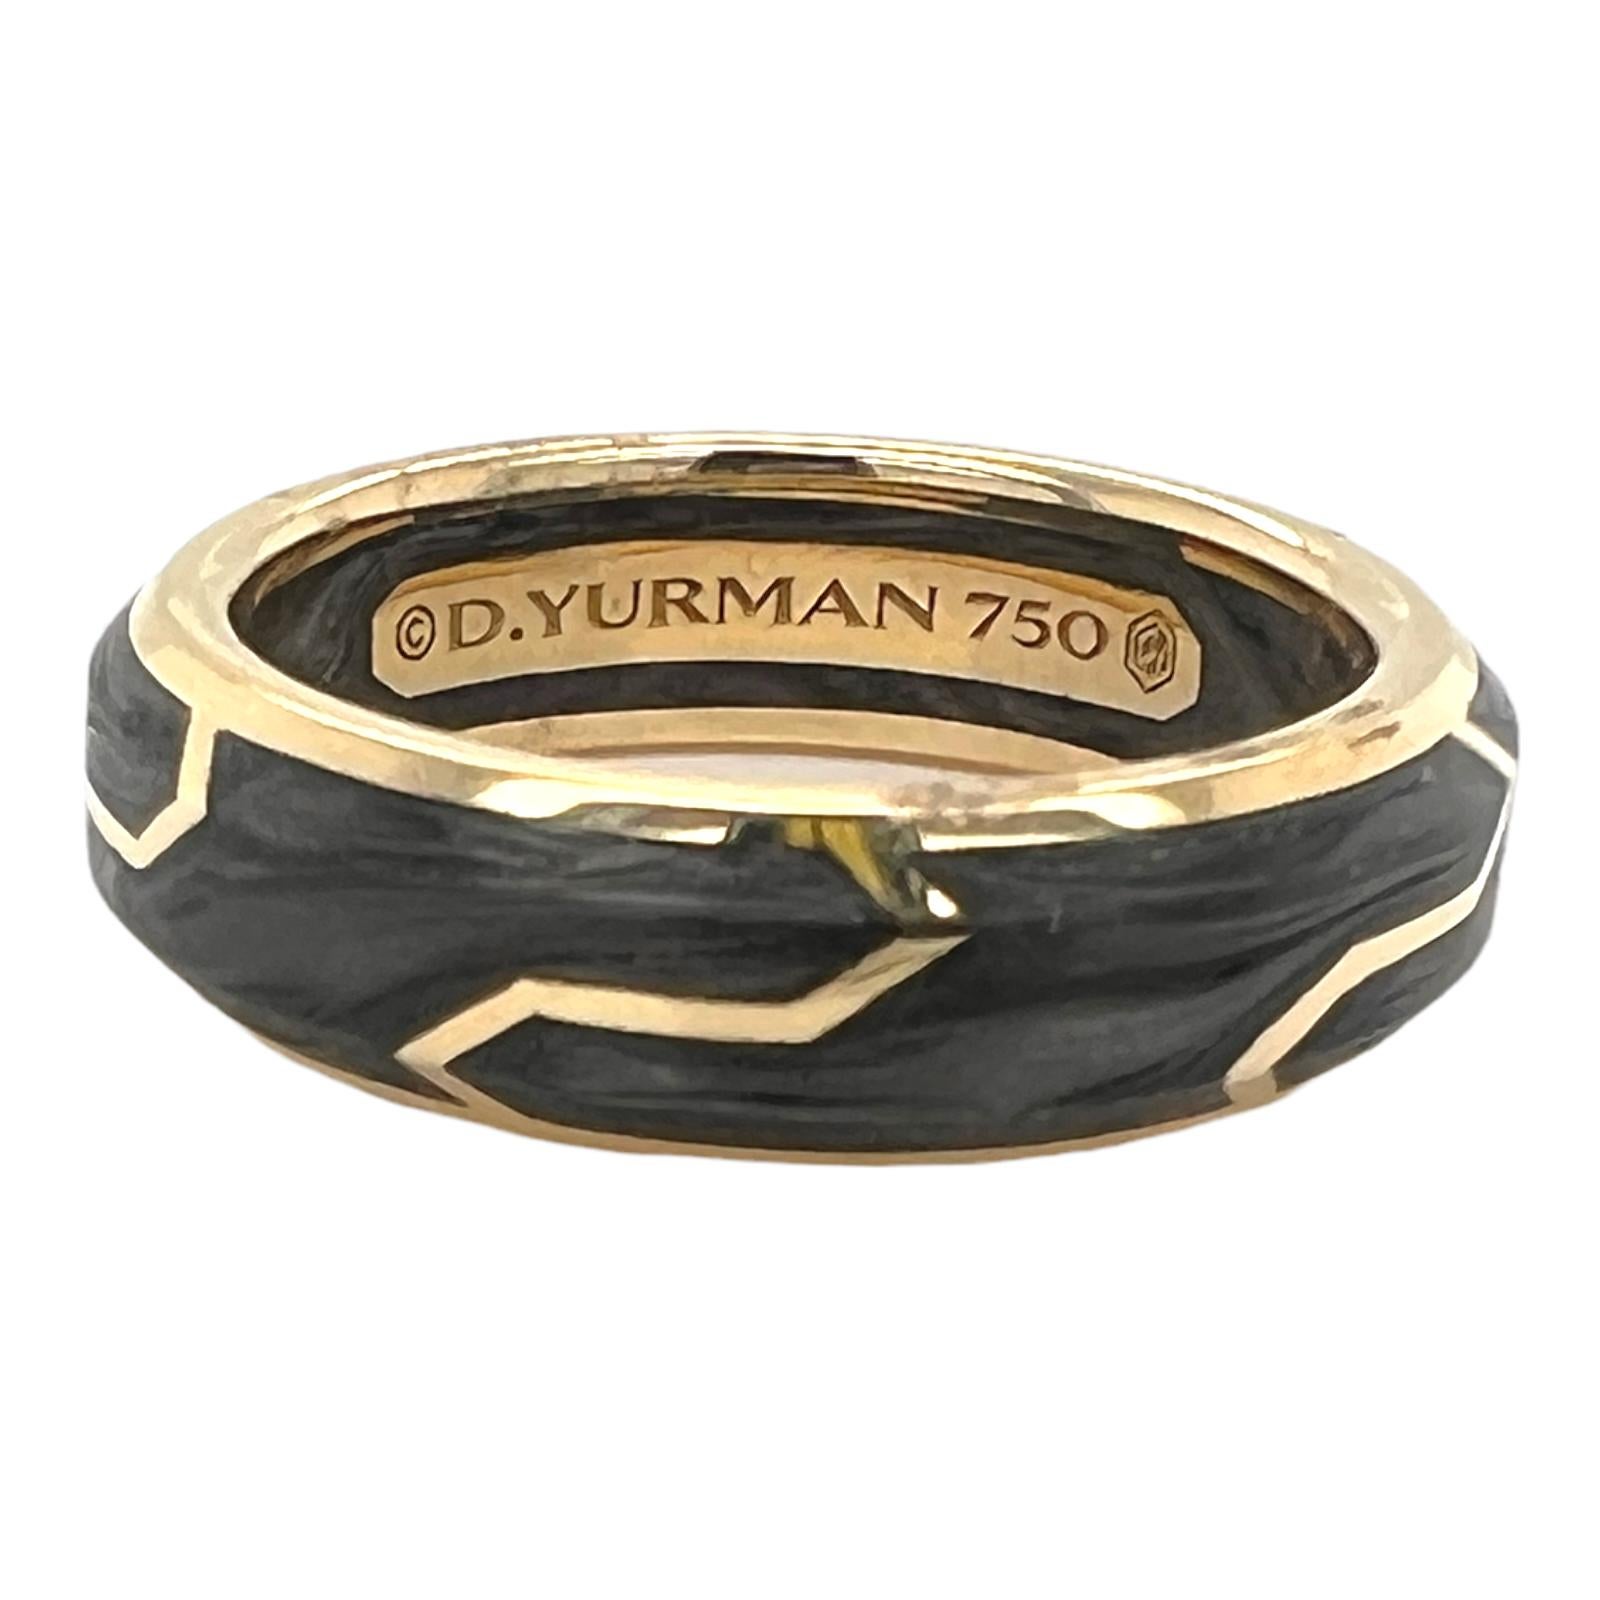 David Yurman Gents modern band ring crafted in 18 karat yellow gold and forged carbon. The band measures 6mm in width, and is size 8. Signed D. Yurman 750.